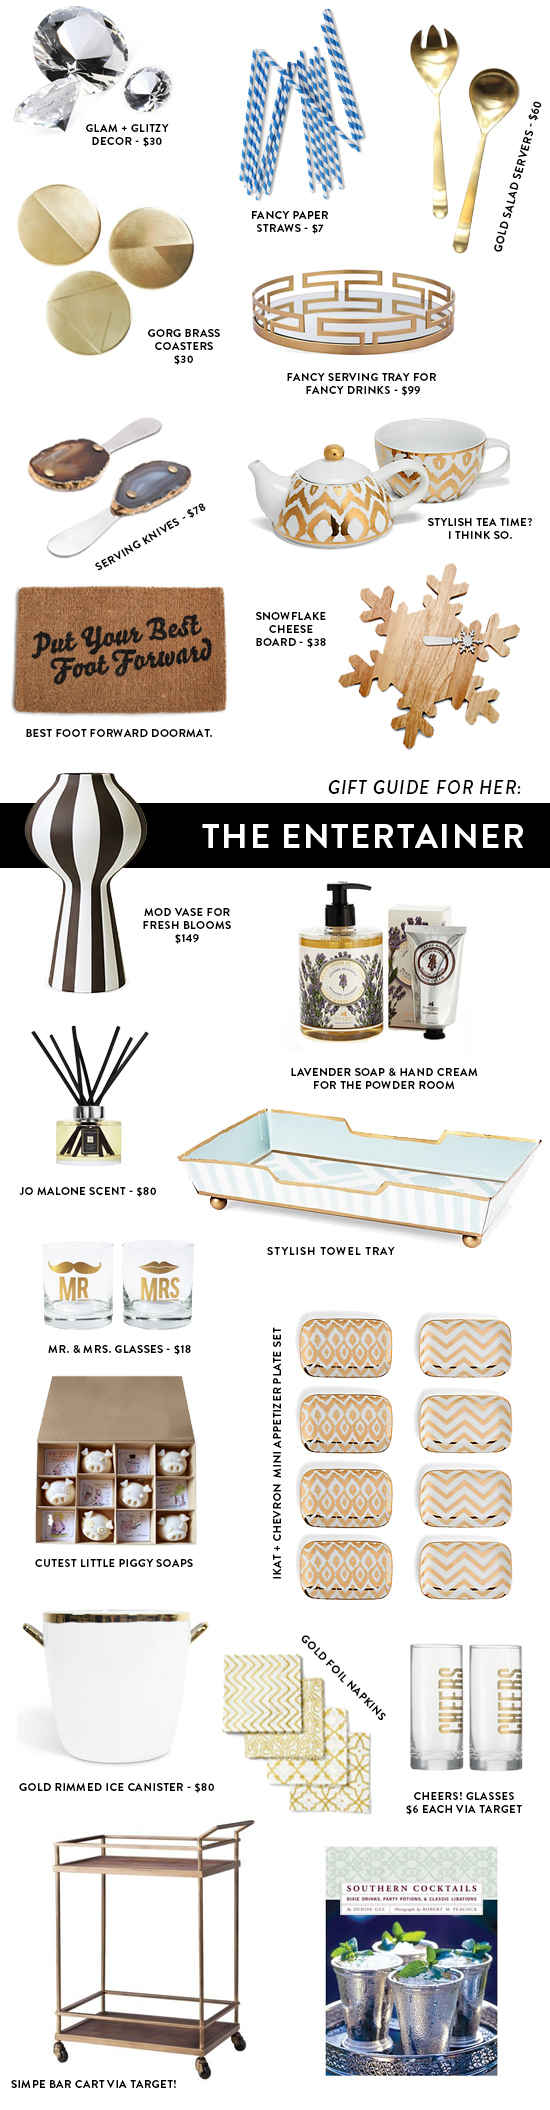 gift-guide-for-the-entertainer